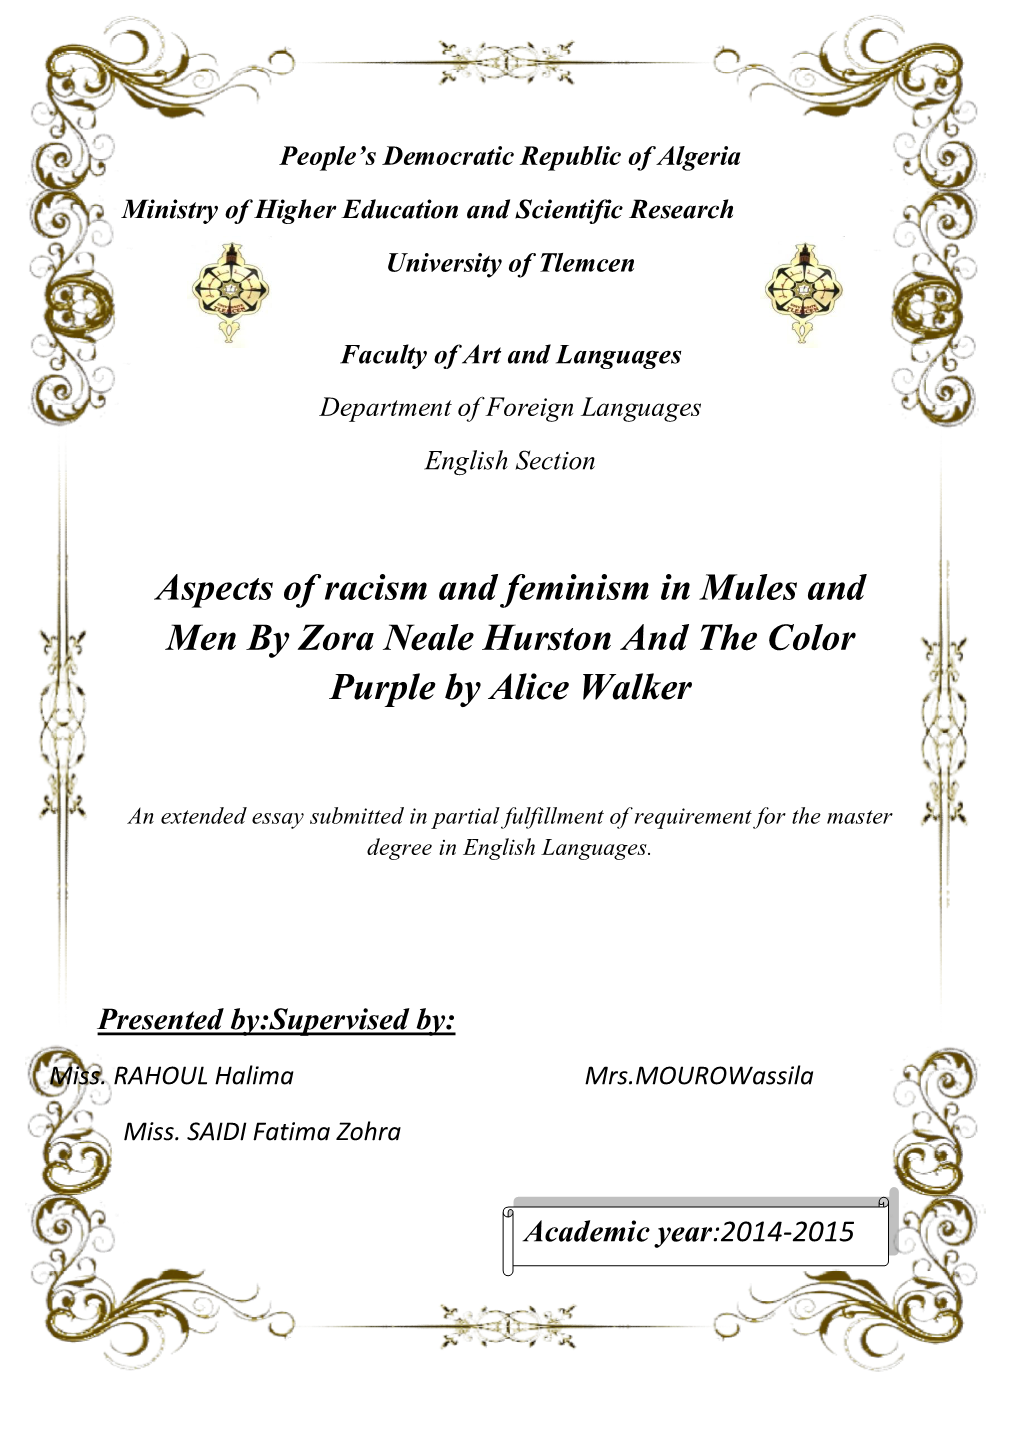 Aspects of Racism and Feminism in Mules and Men by Zora Neale Hurston and the Color Purple by Alice Walker